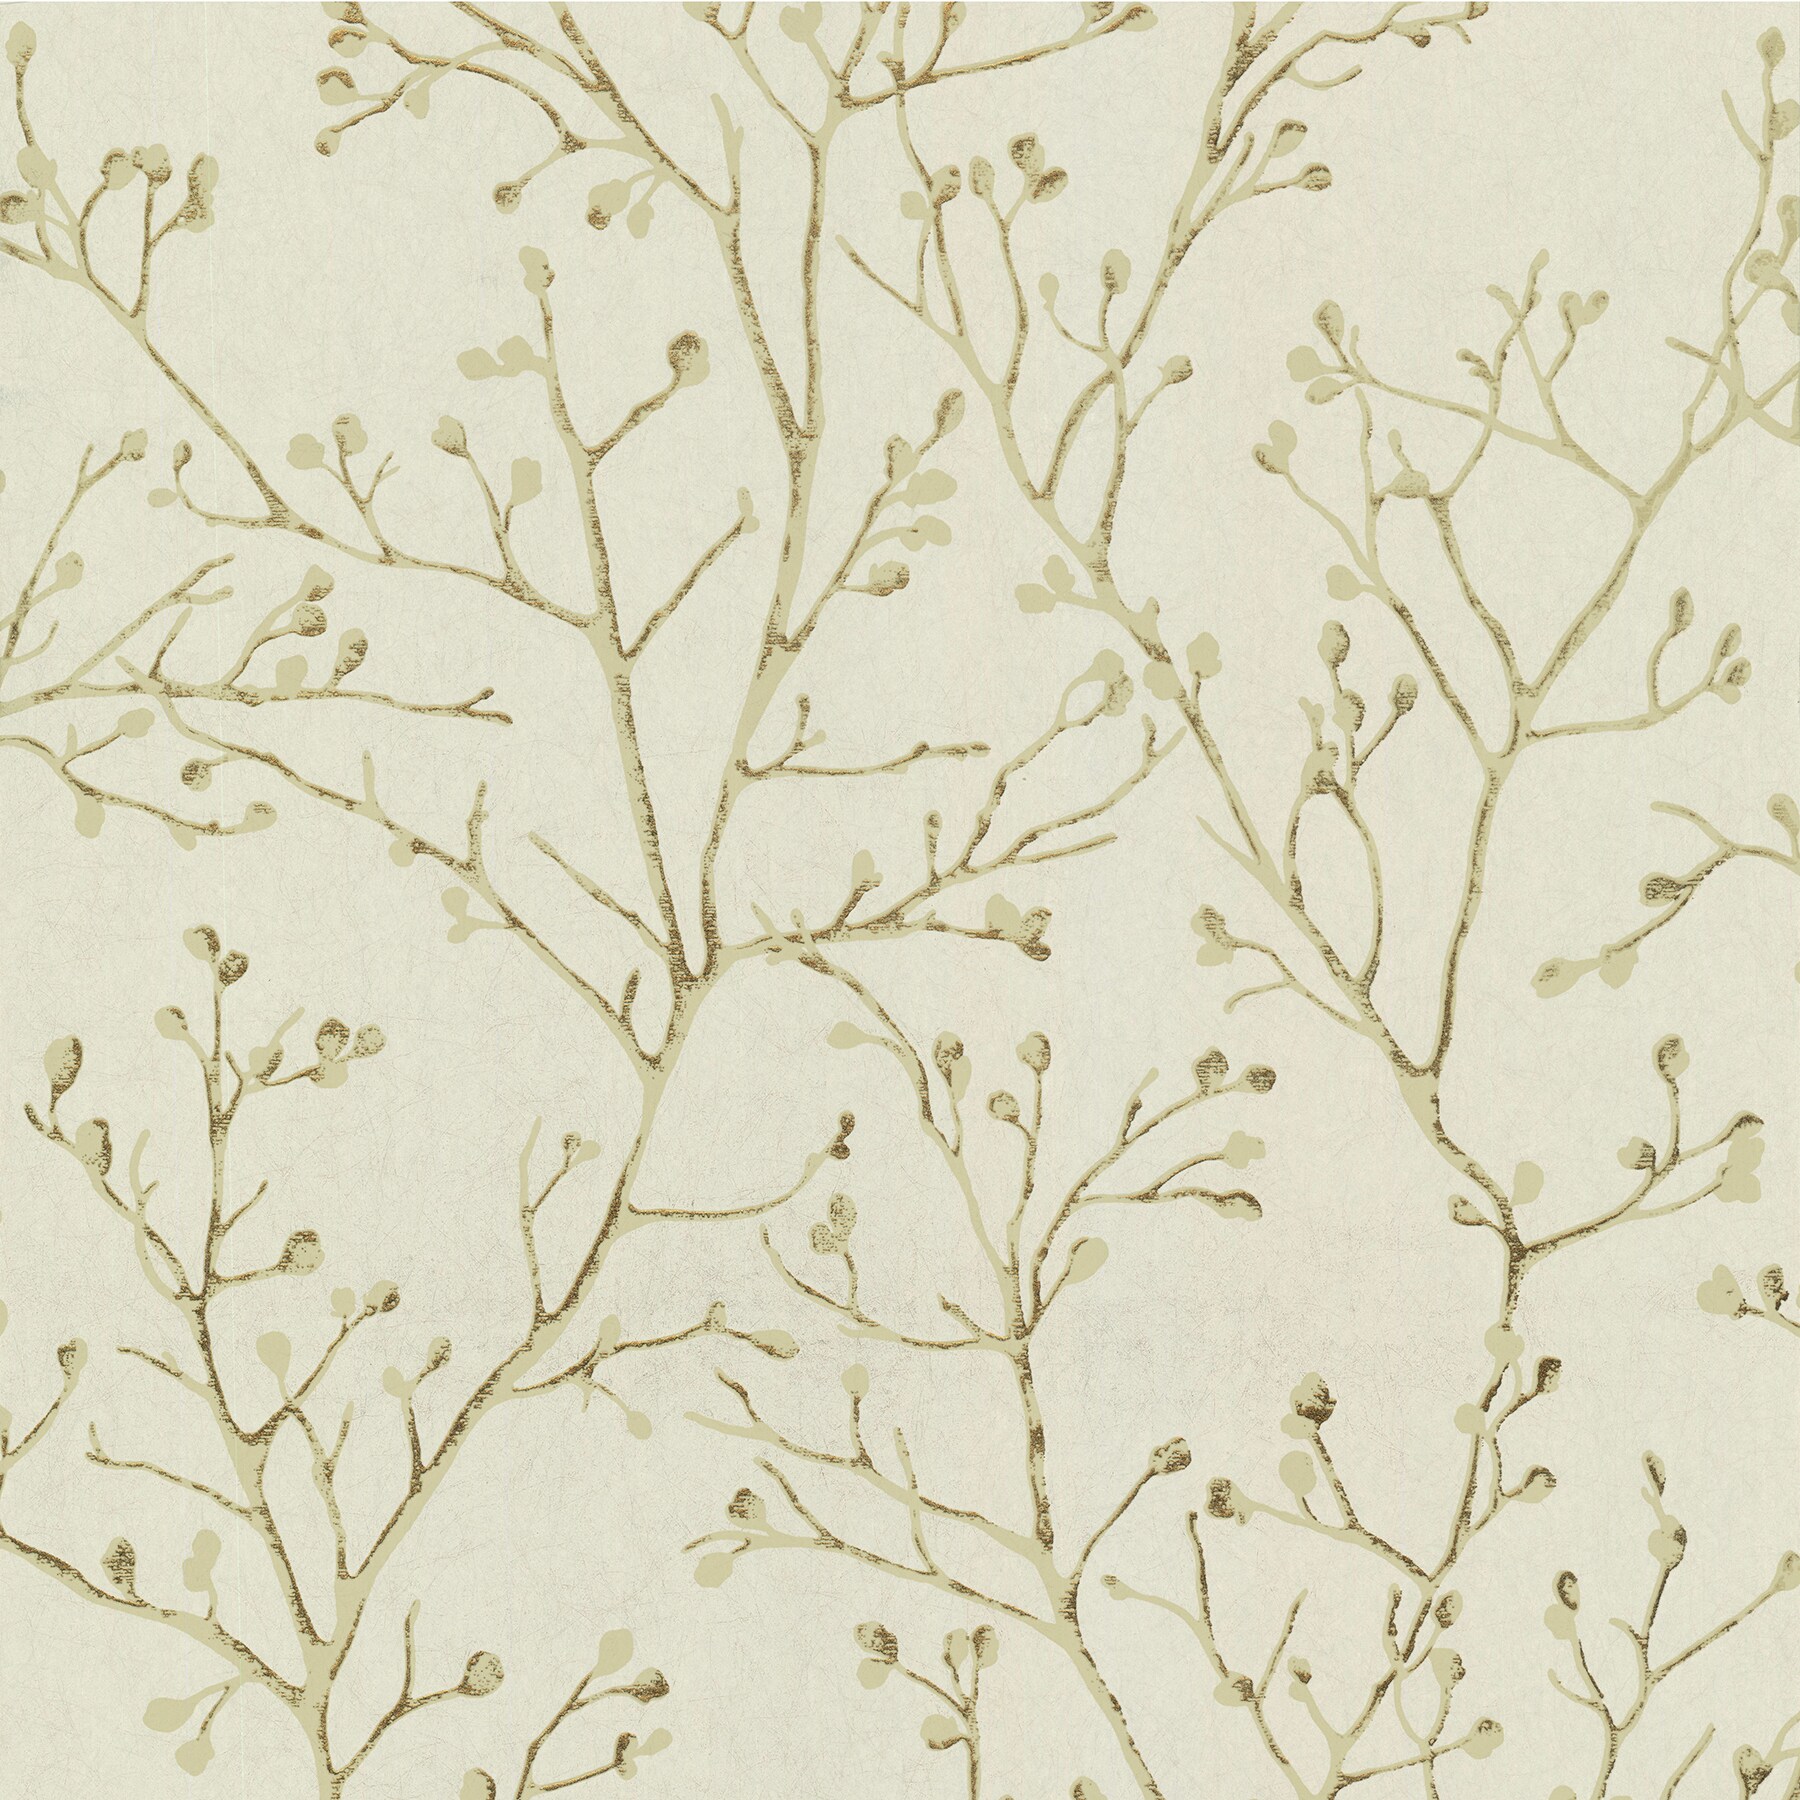 A-Street Prints Koura Gold Budding Branches Wallpaper in the Wallpaper ...